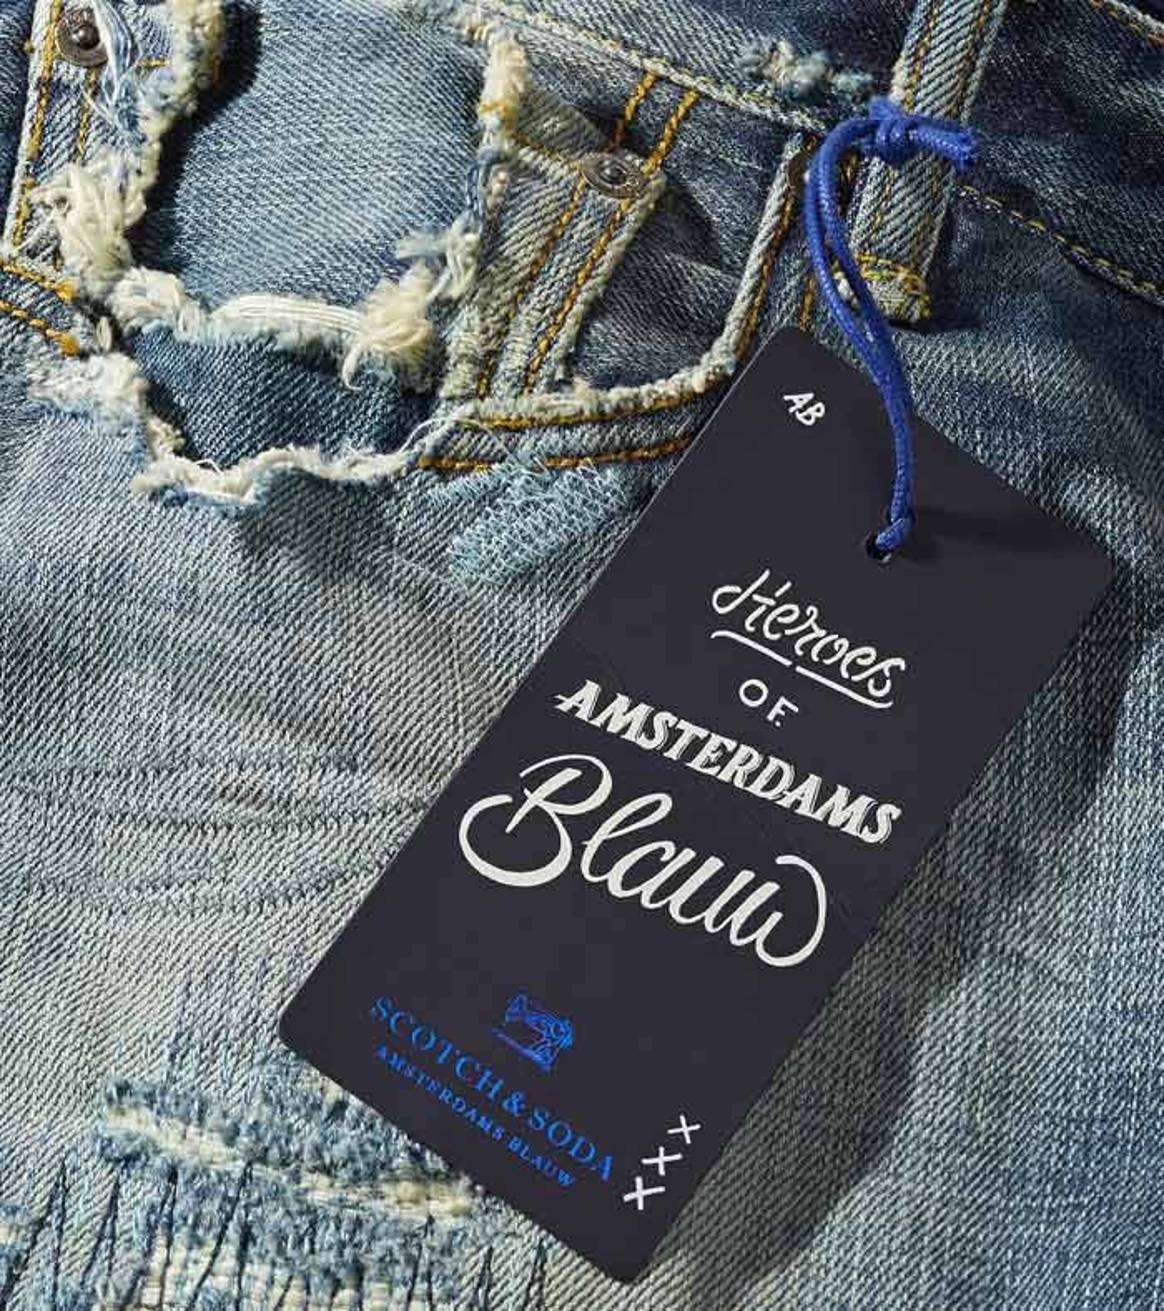 How do you tell the story of denim?